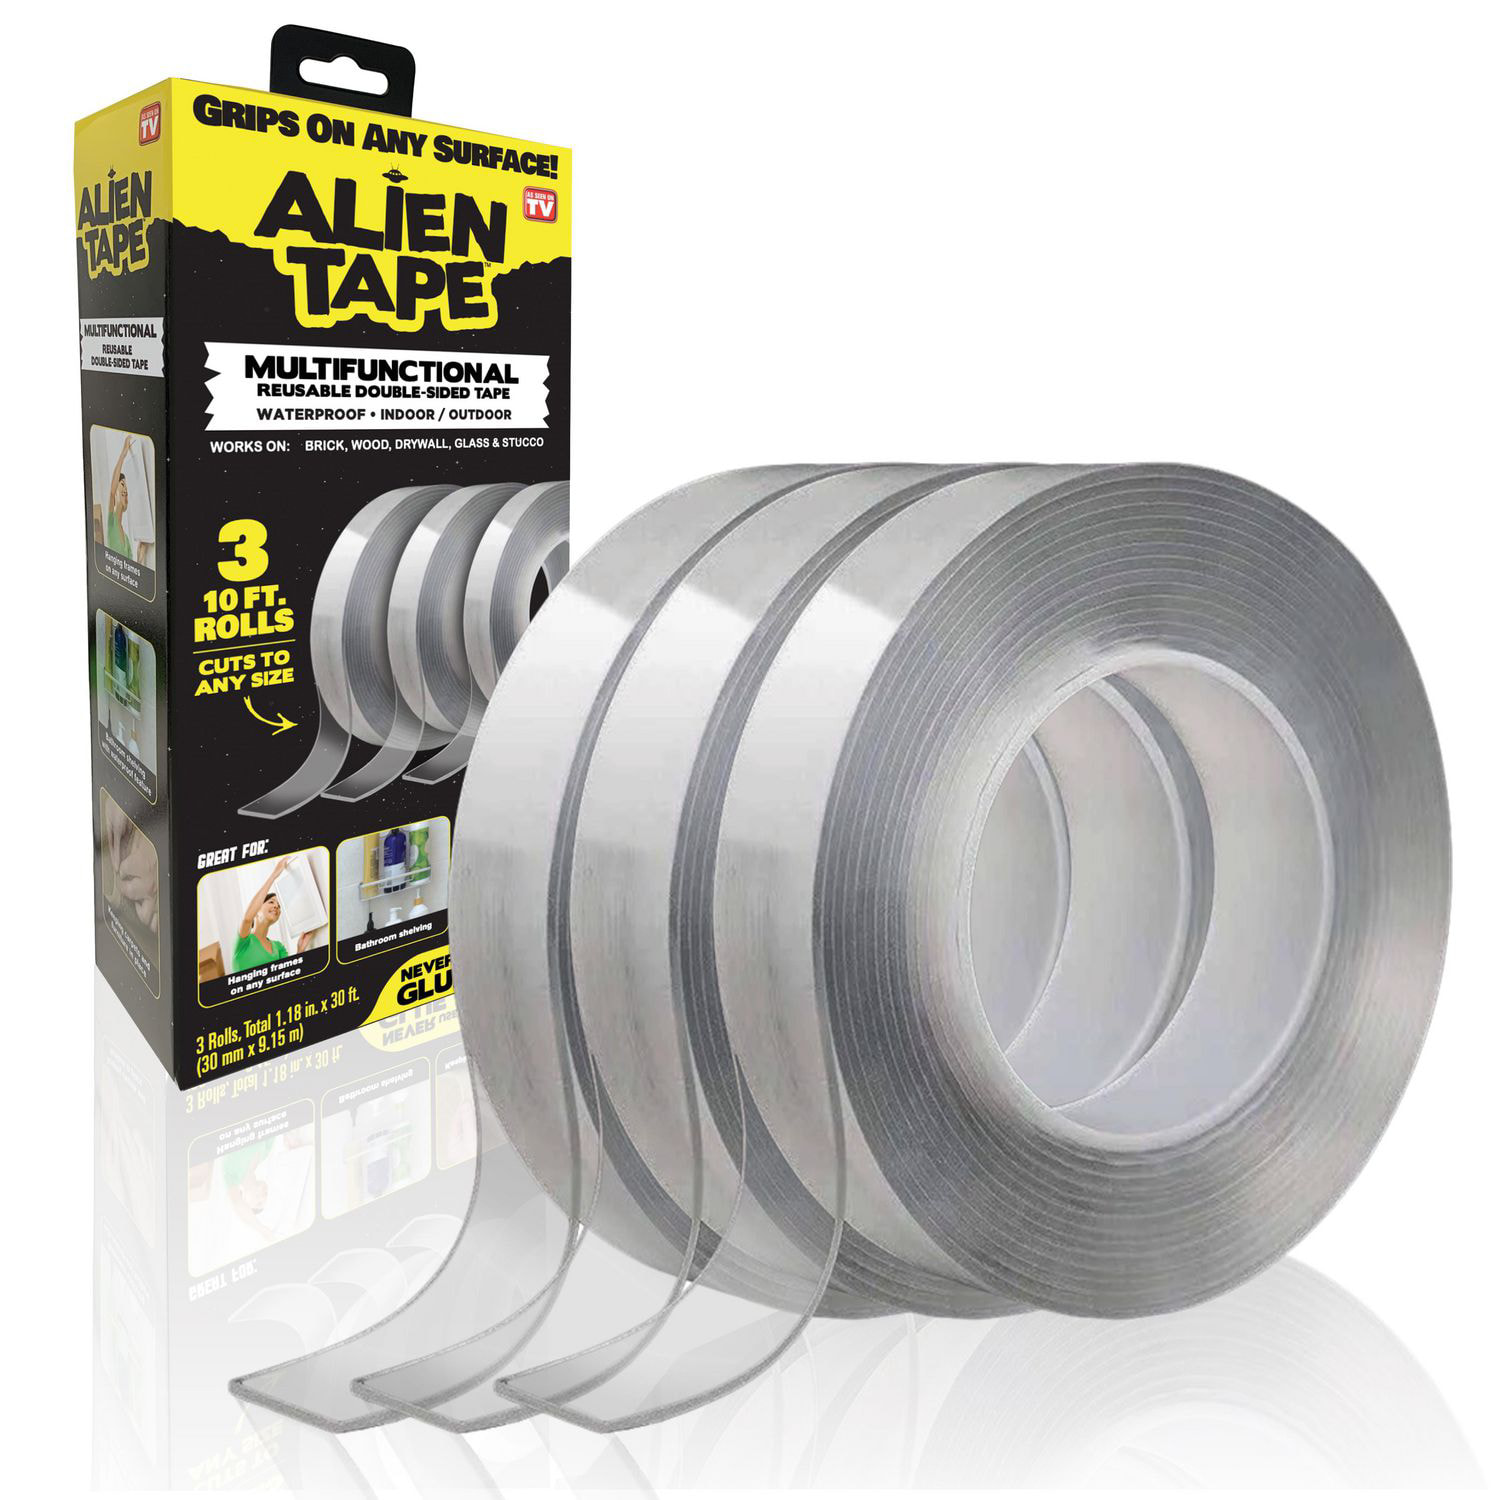 Alien Tape Nano Double Sided Tape, Multipurpose Removable Adhesive